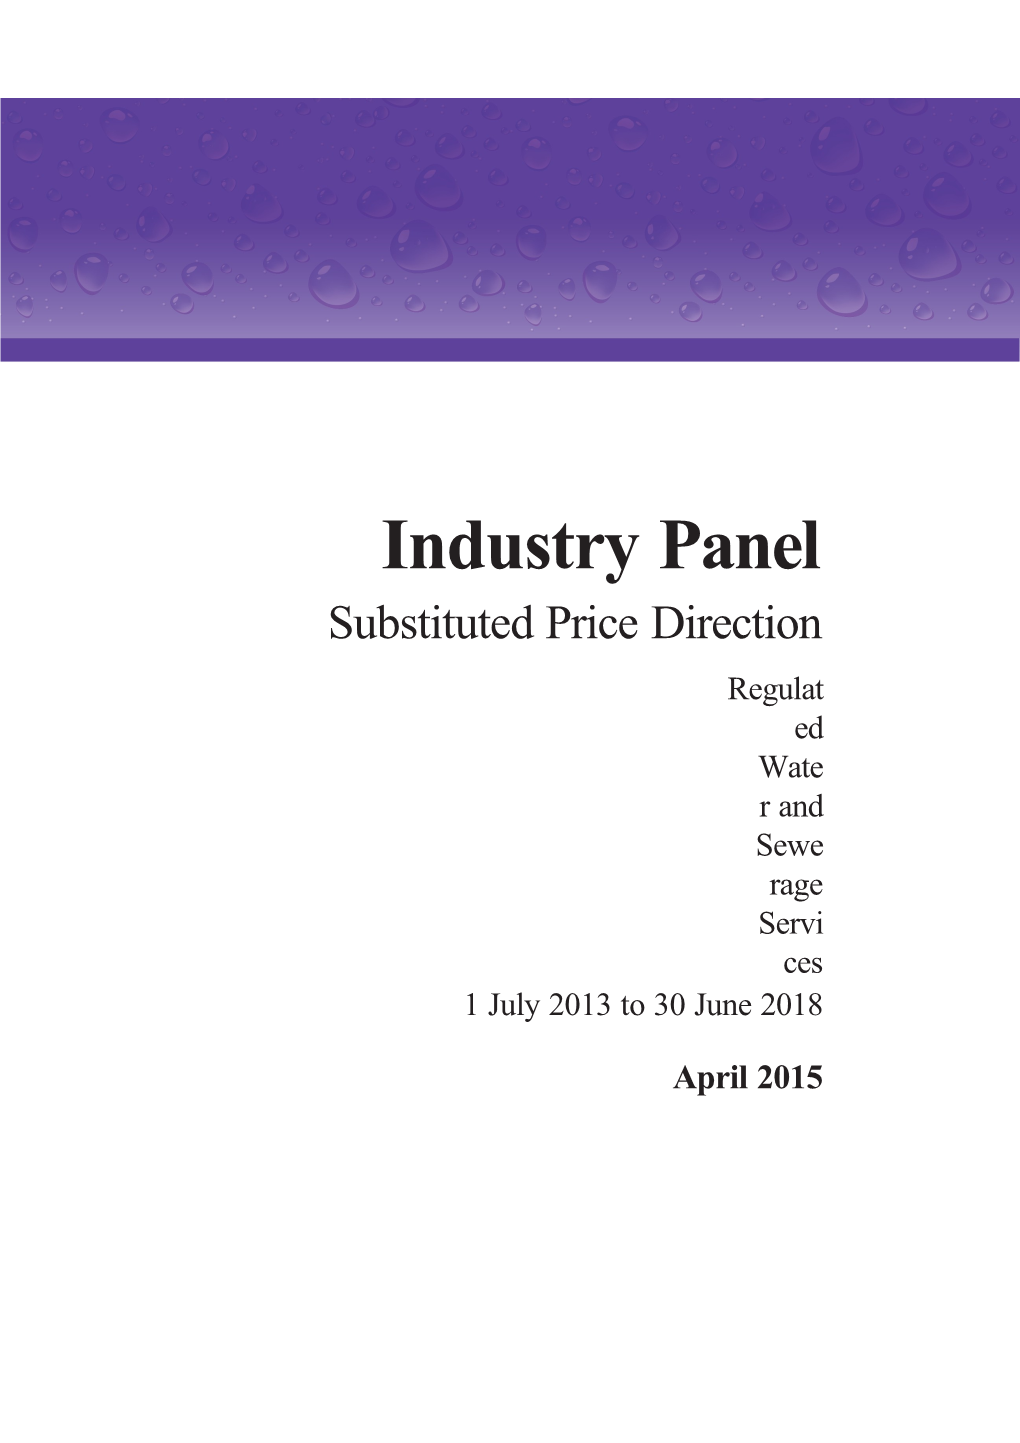 Industry Panel Substituted Price Direction